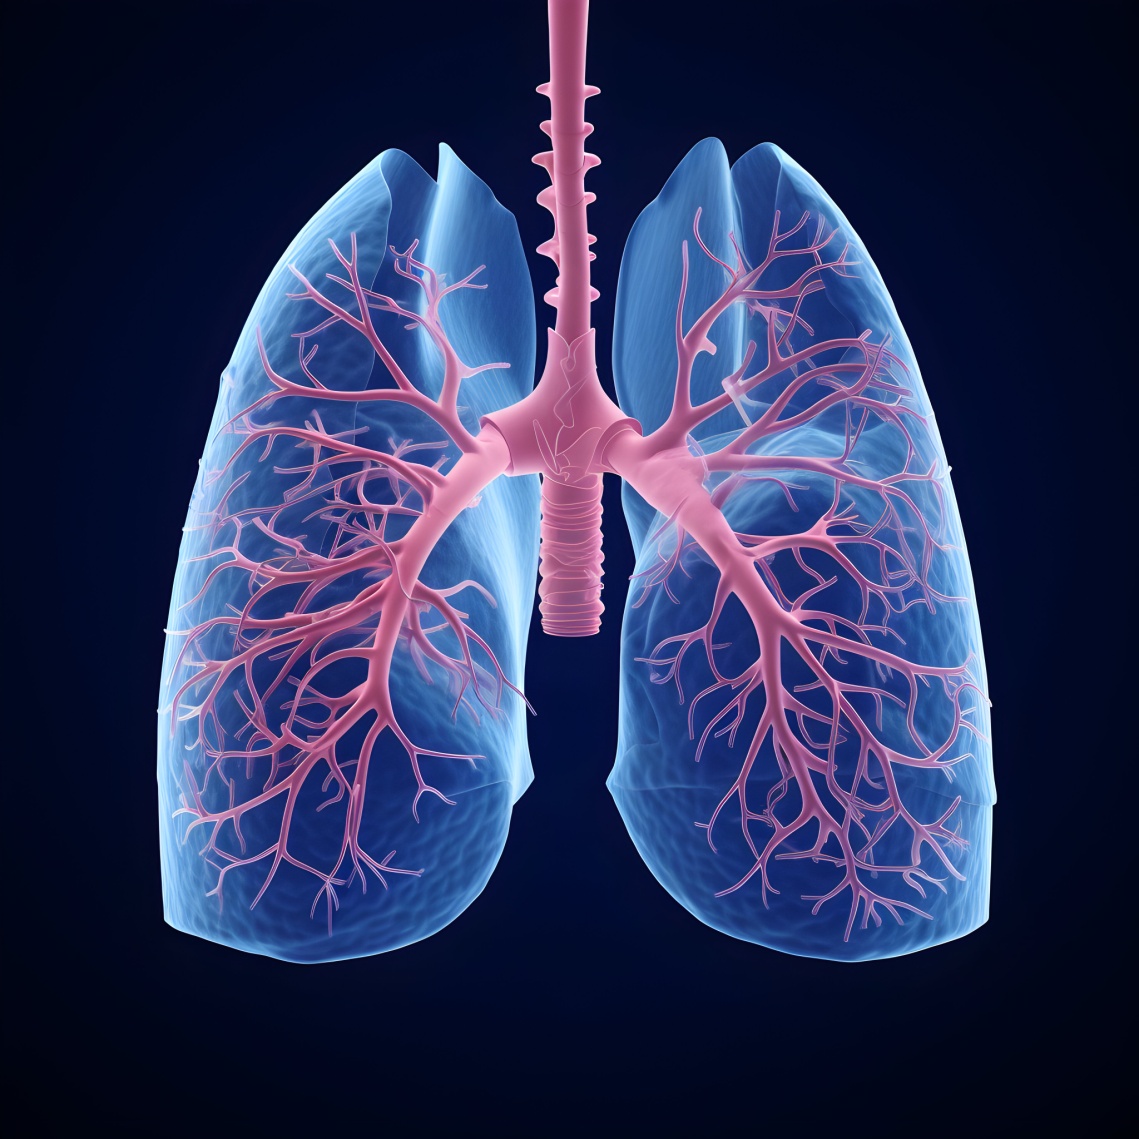 C:\Users\home\Downloads\photo-medical-banner-with-healthy-human-lungs-illustration-isolated-background.jpg